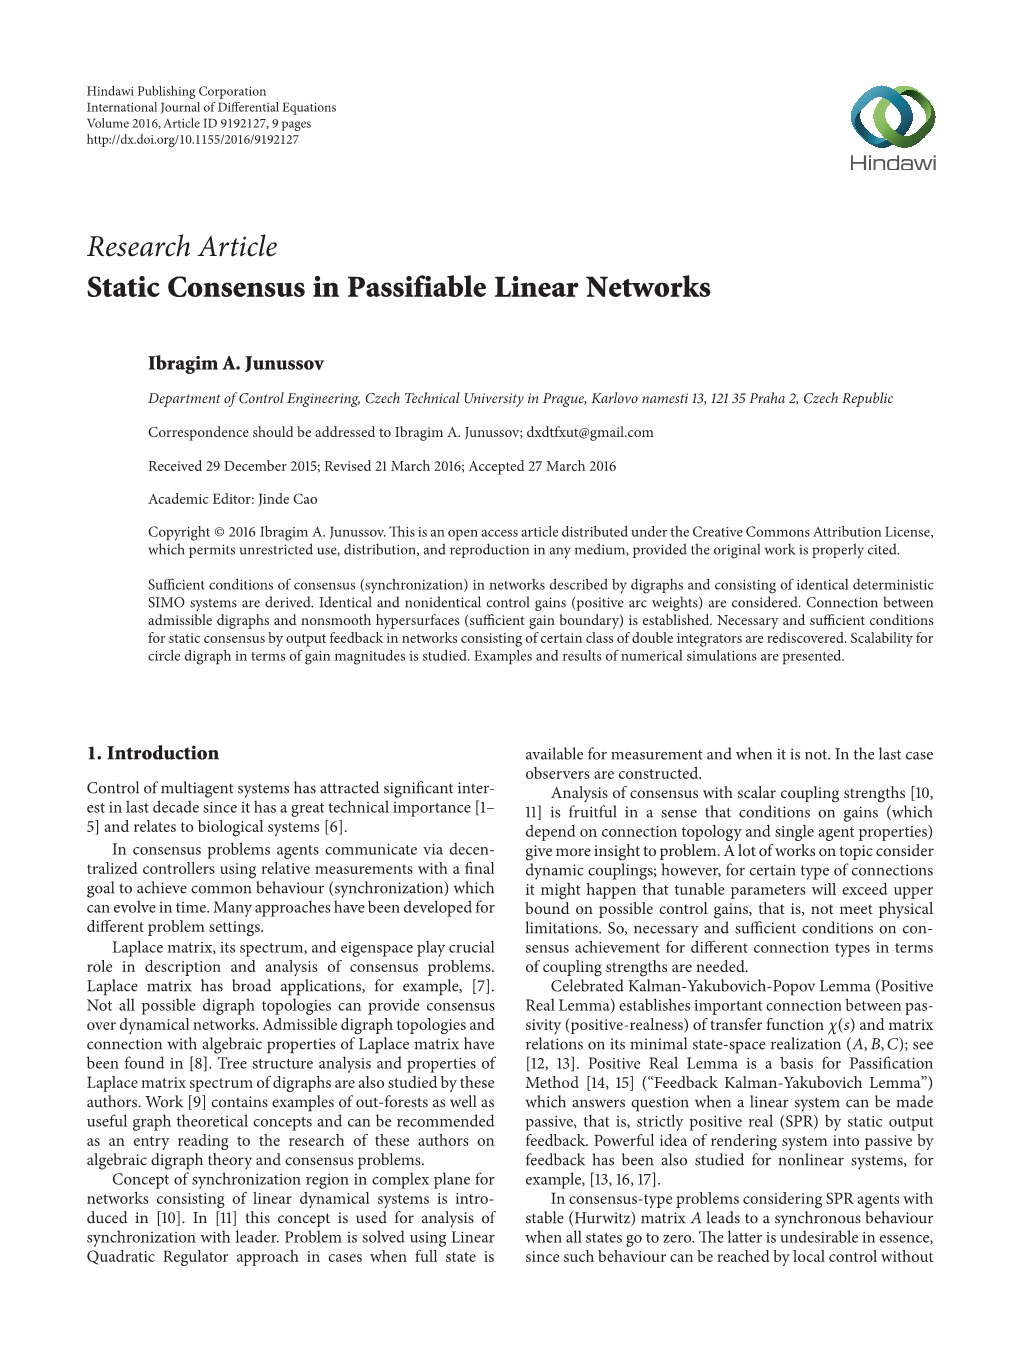 Research Article Static Consensus in Passifiable Linear Networks